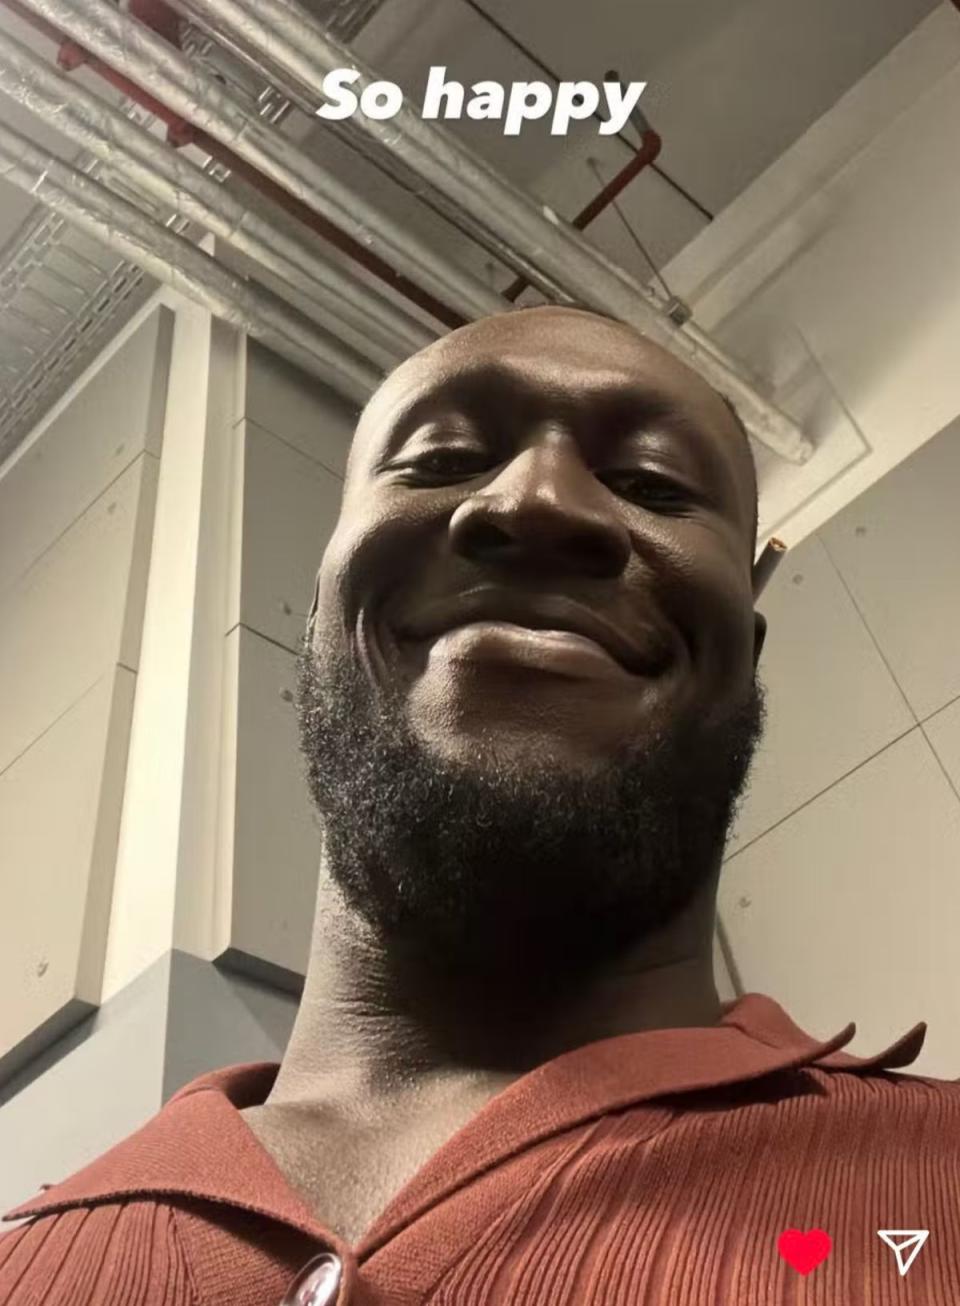 The Vossi Bop rapper shared his delight after securing a selfie with the star (Stormzy)